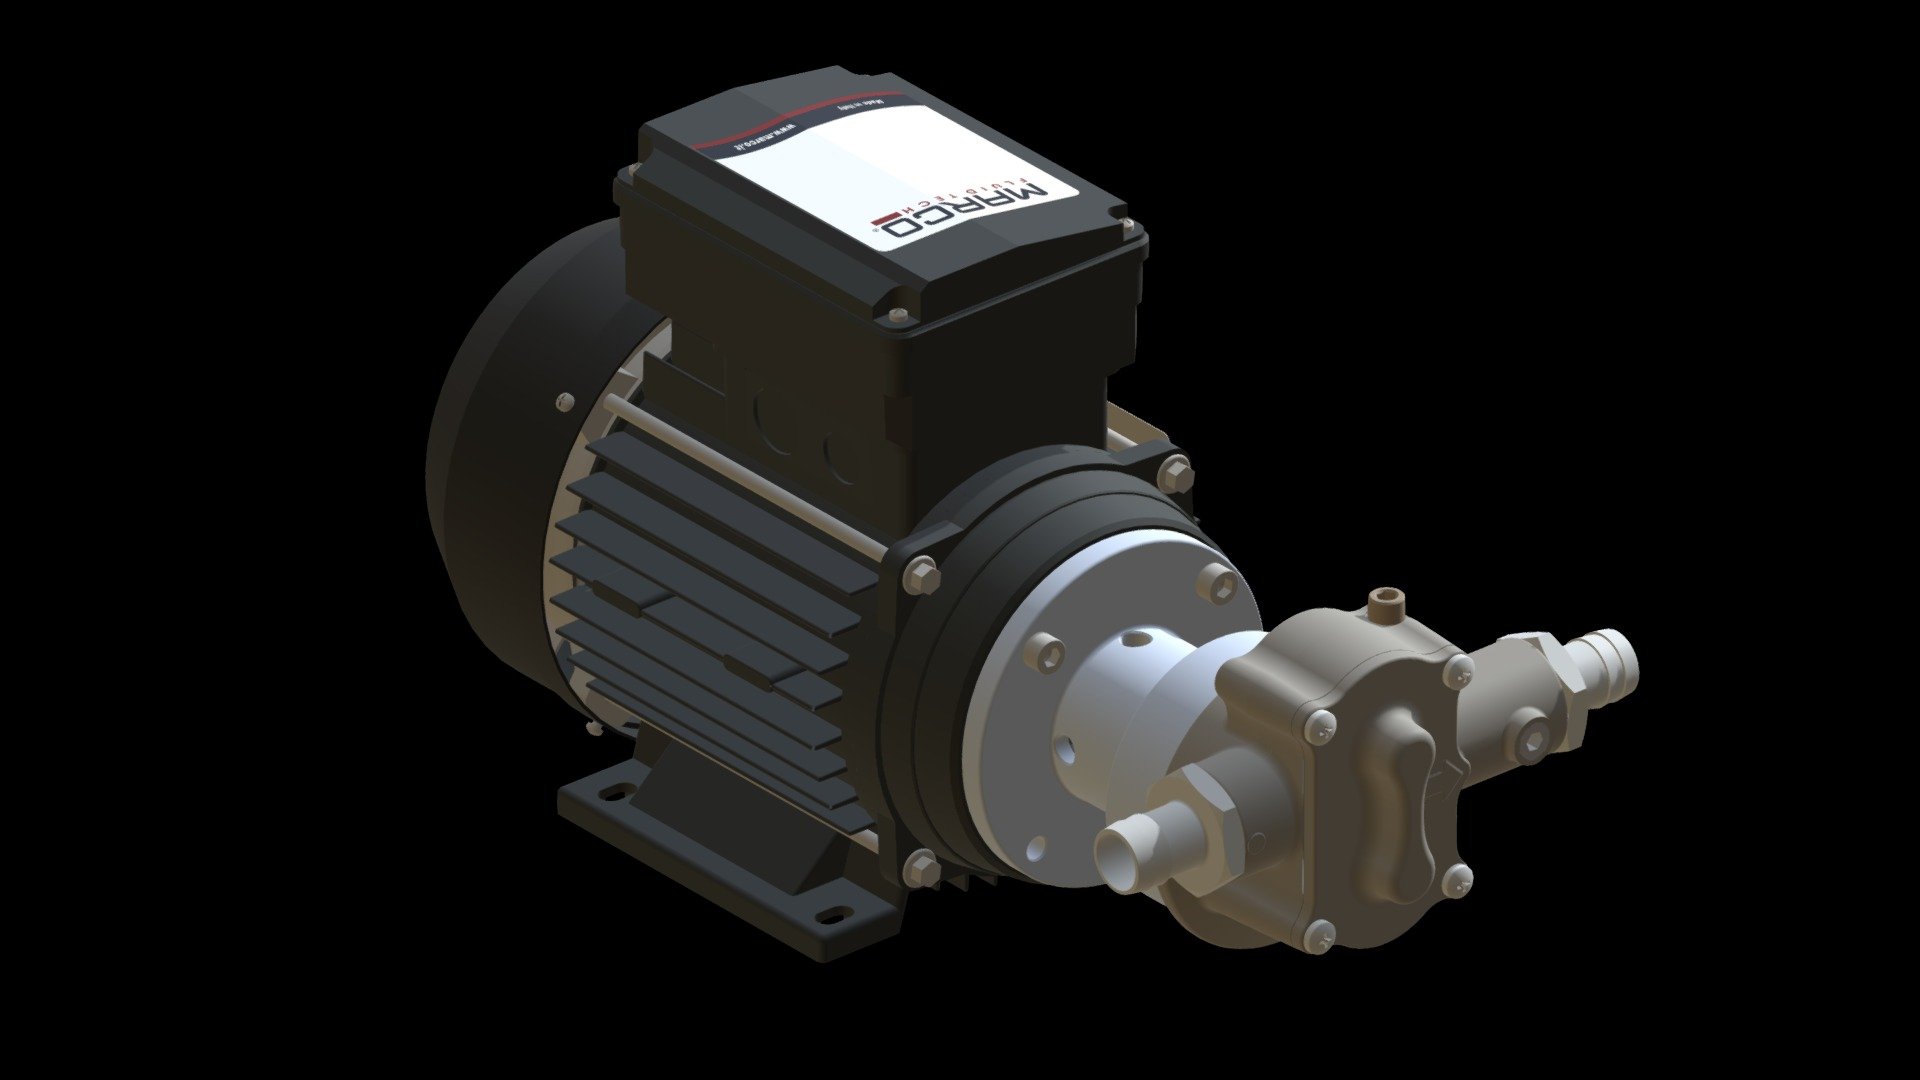 UP14/OIL-AC pump for oil
Self-priming electric pumps with helical bronze gears for transferring lubricating oils and viscous liquids. Nickel-plated brass body and stainless steel shaft 3d model